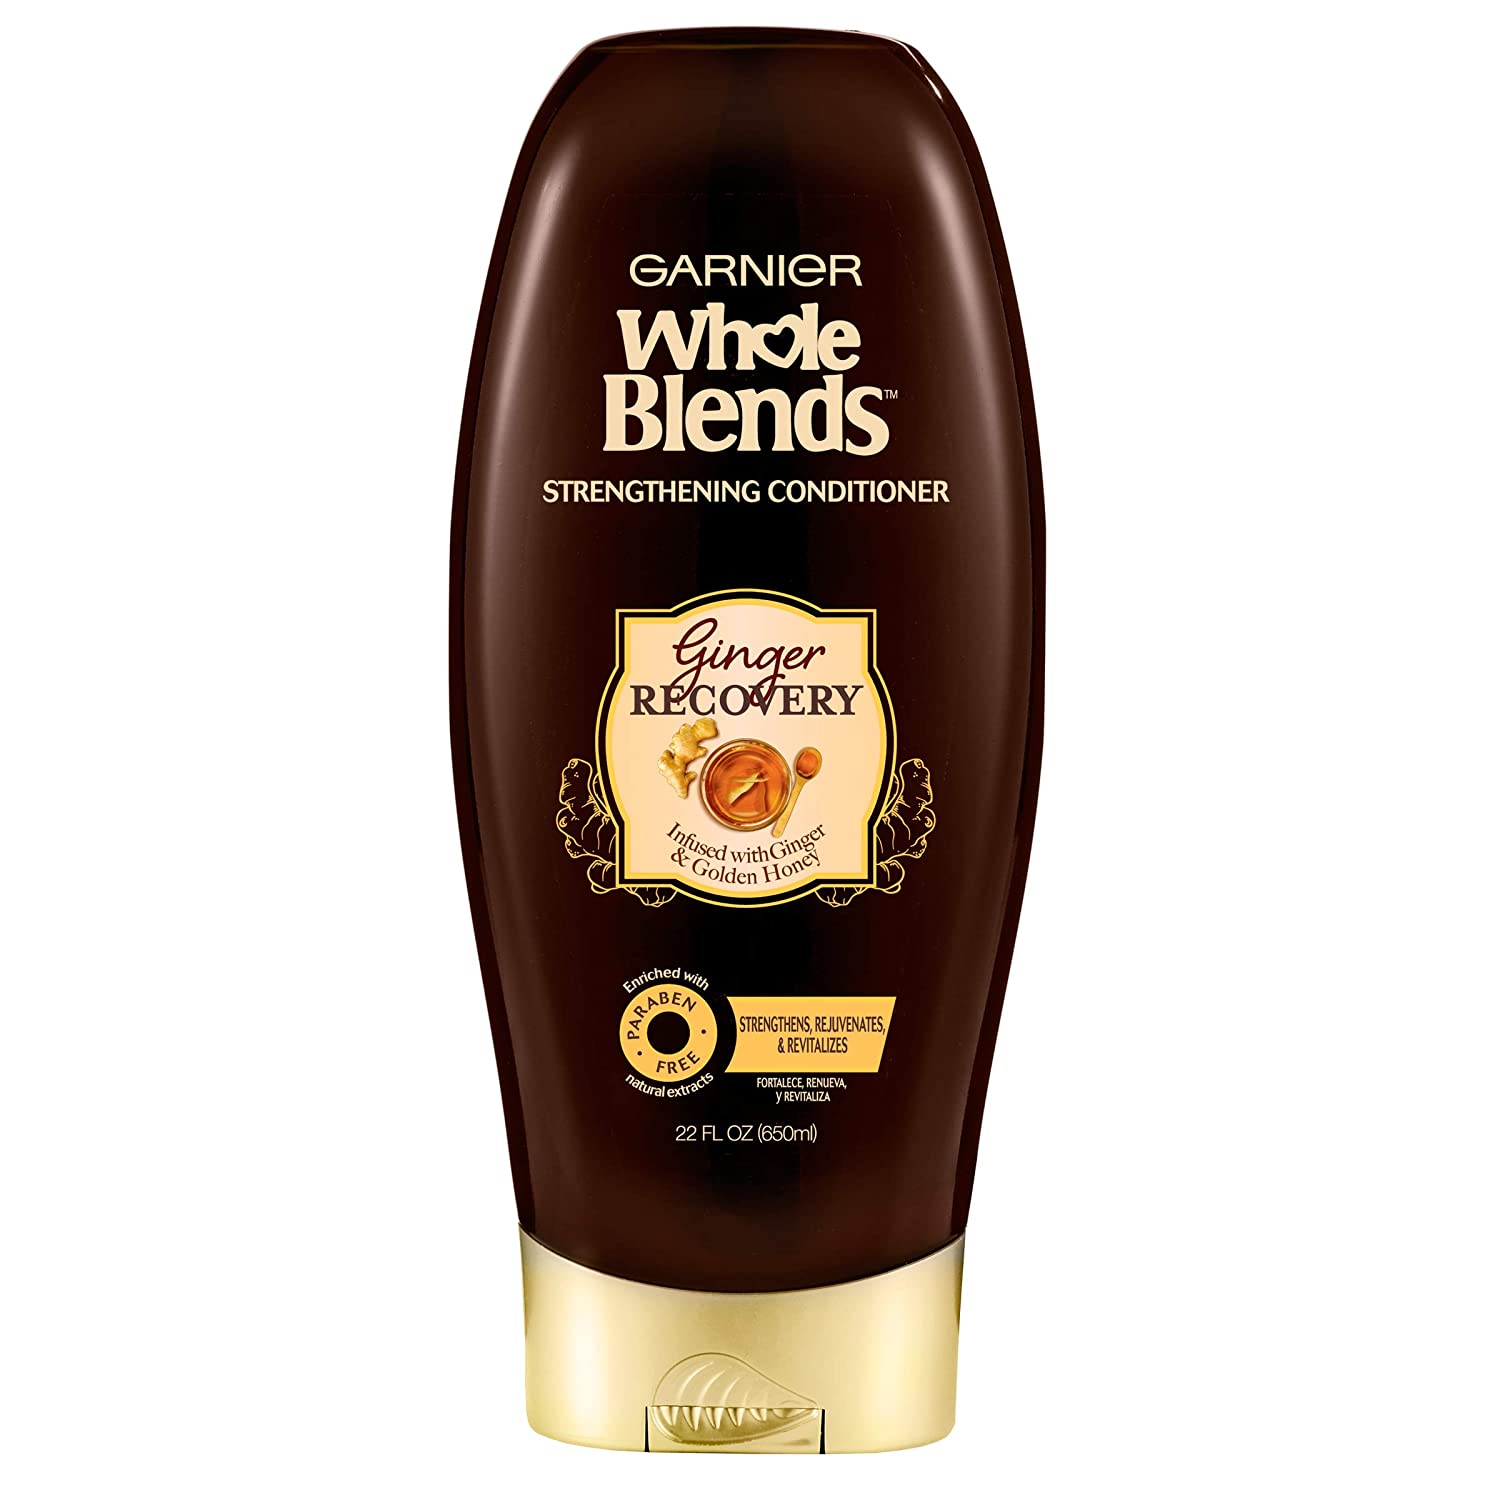 ''Garnier HAIR Care Whole Blends Strengthening Ginger Recovery Conditioner, 22 Fluid Ounce''